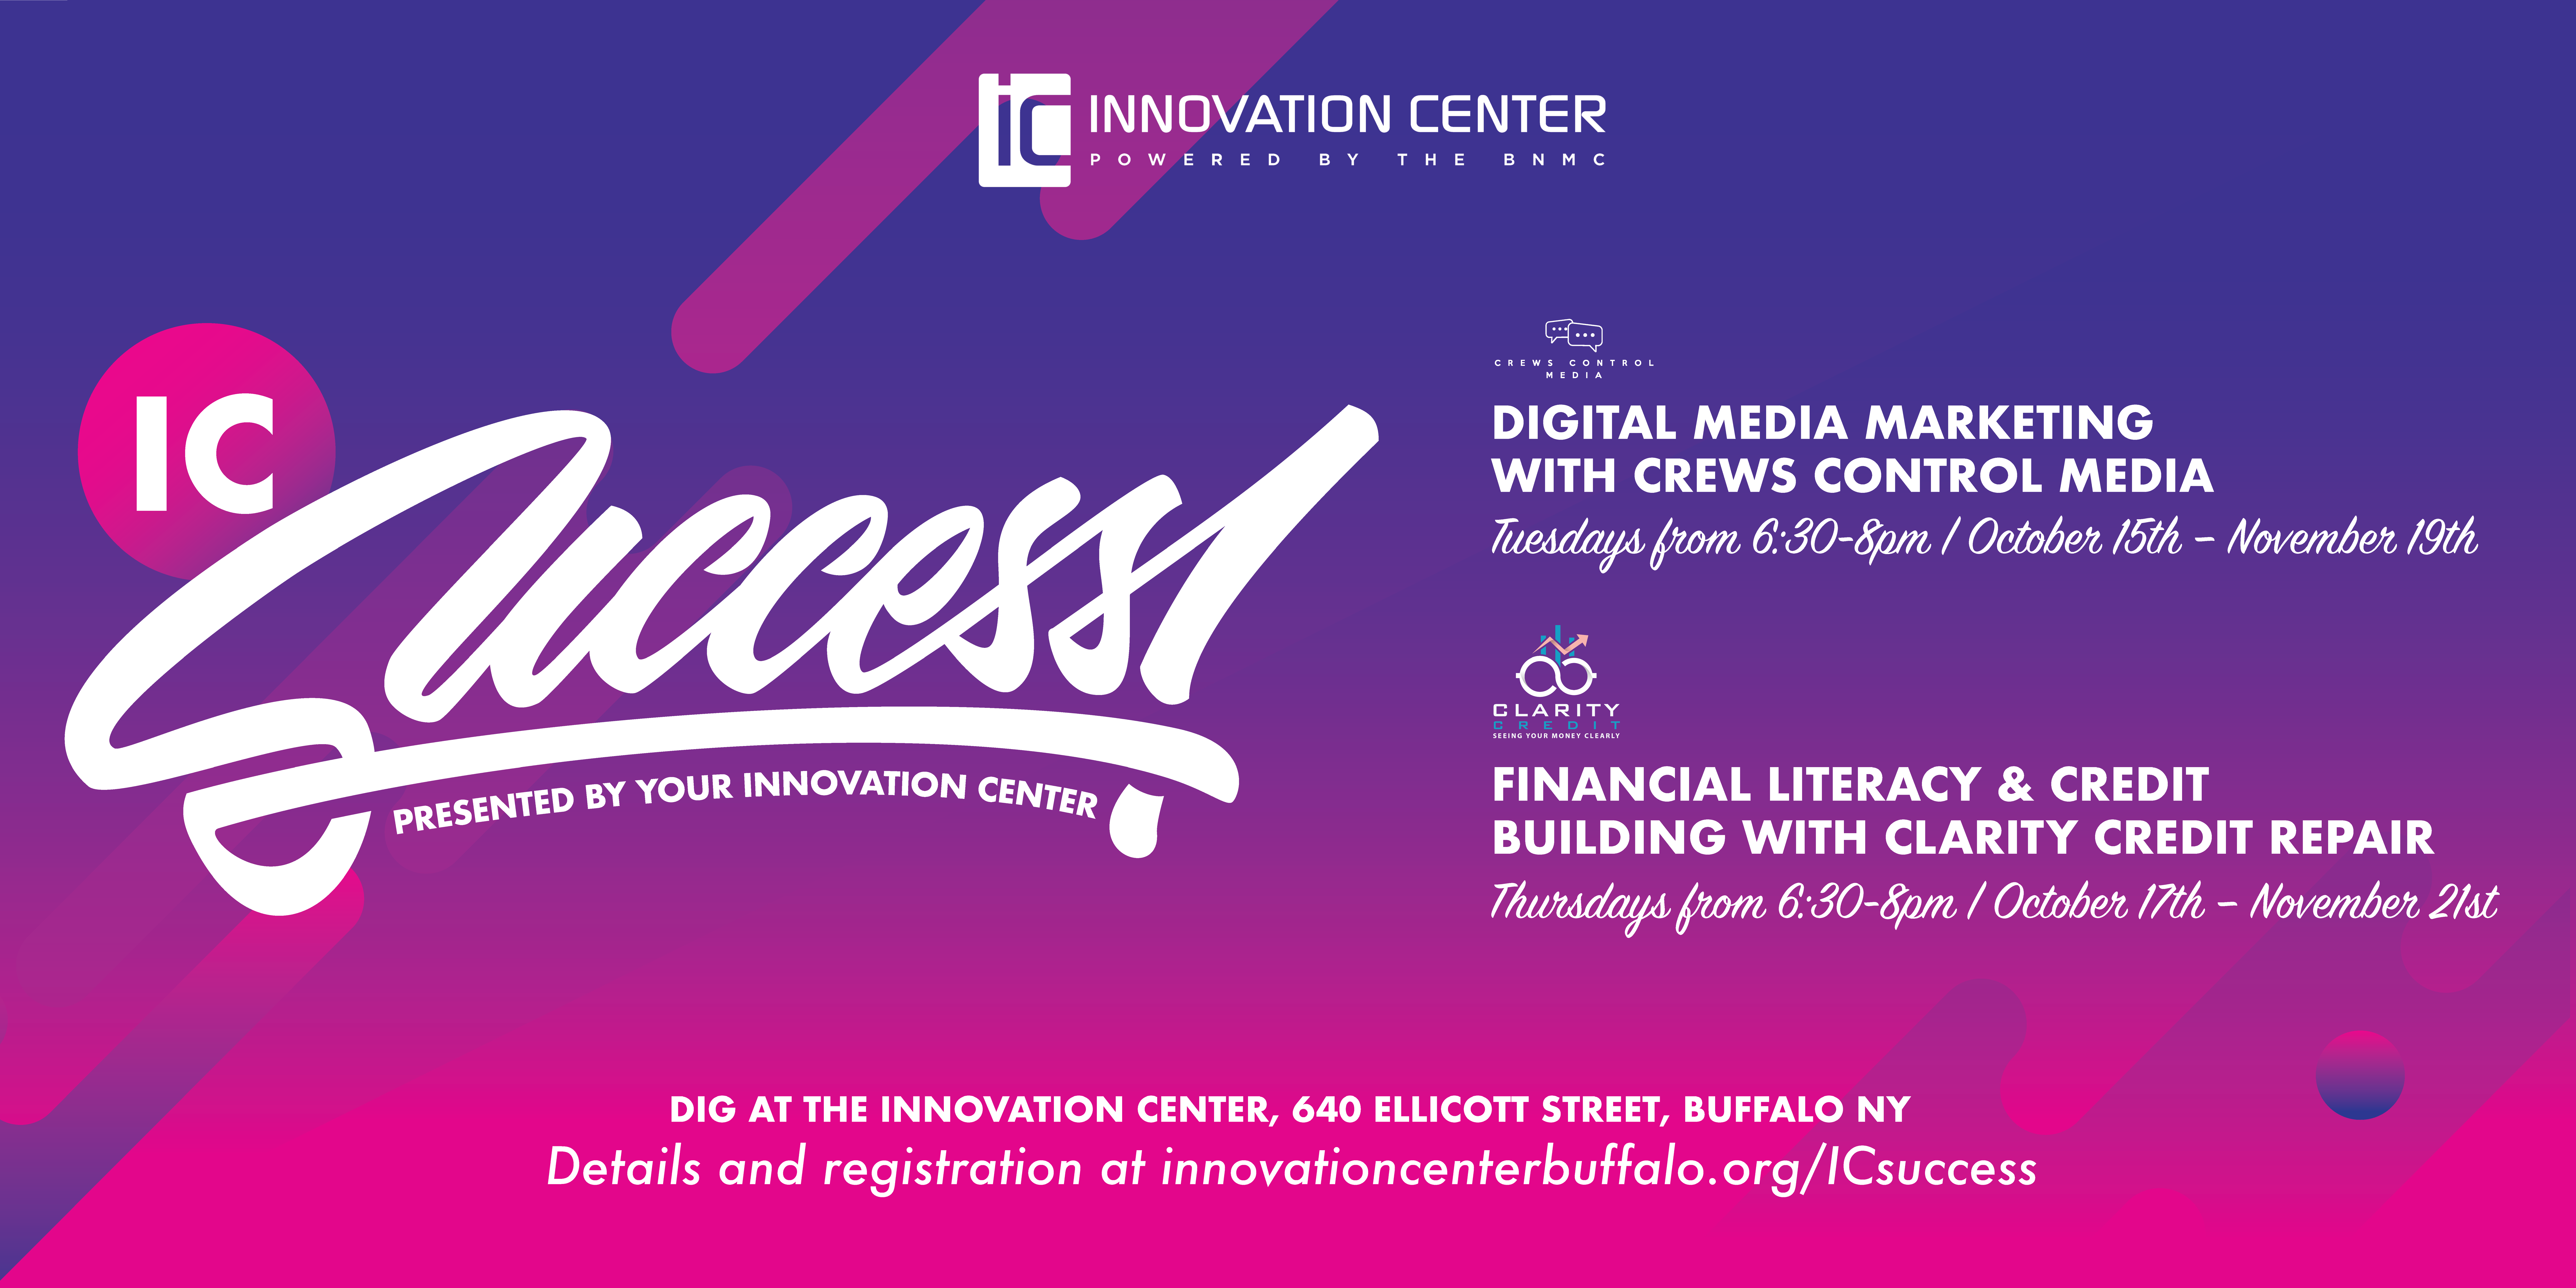 Your Innovation Center Presents: IC Success!